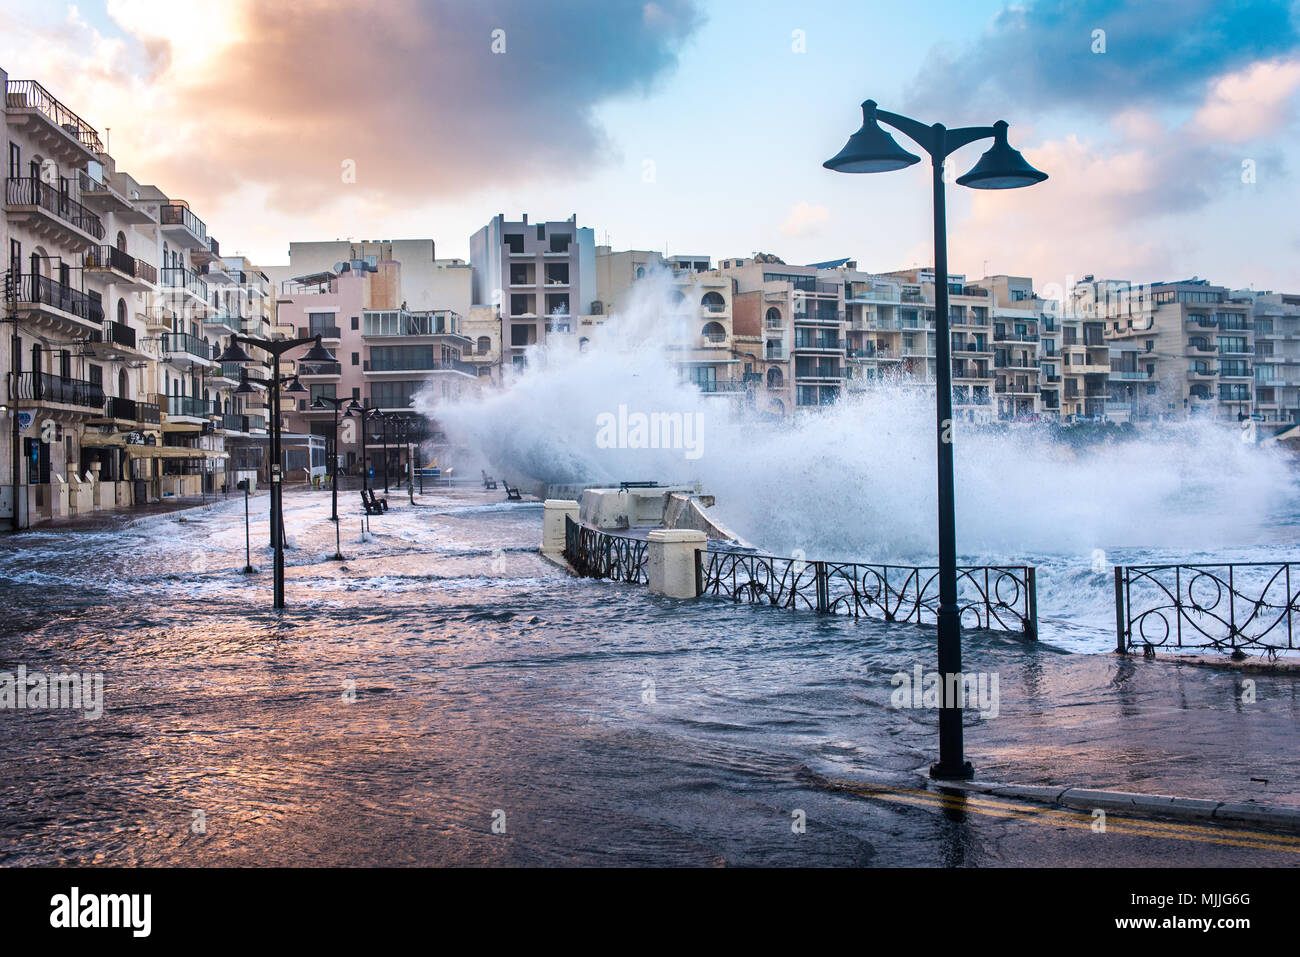 Marsalforn, Malta - January 2, 2018: Big waves are crashing into the Marsalforn promenade. The village of Marsalforn is on the north caost of Gozo, which is an island of the Maltese archipelago and the second-largest island of Malta. Stock Photo